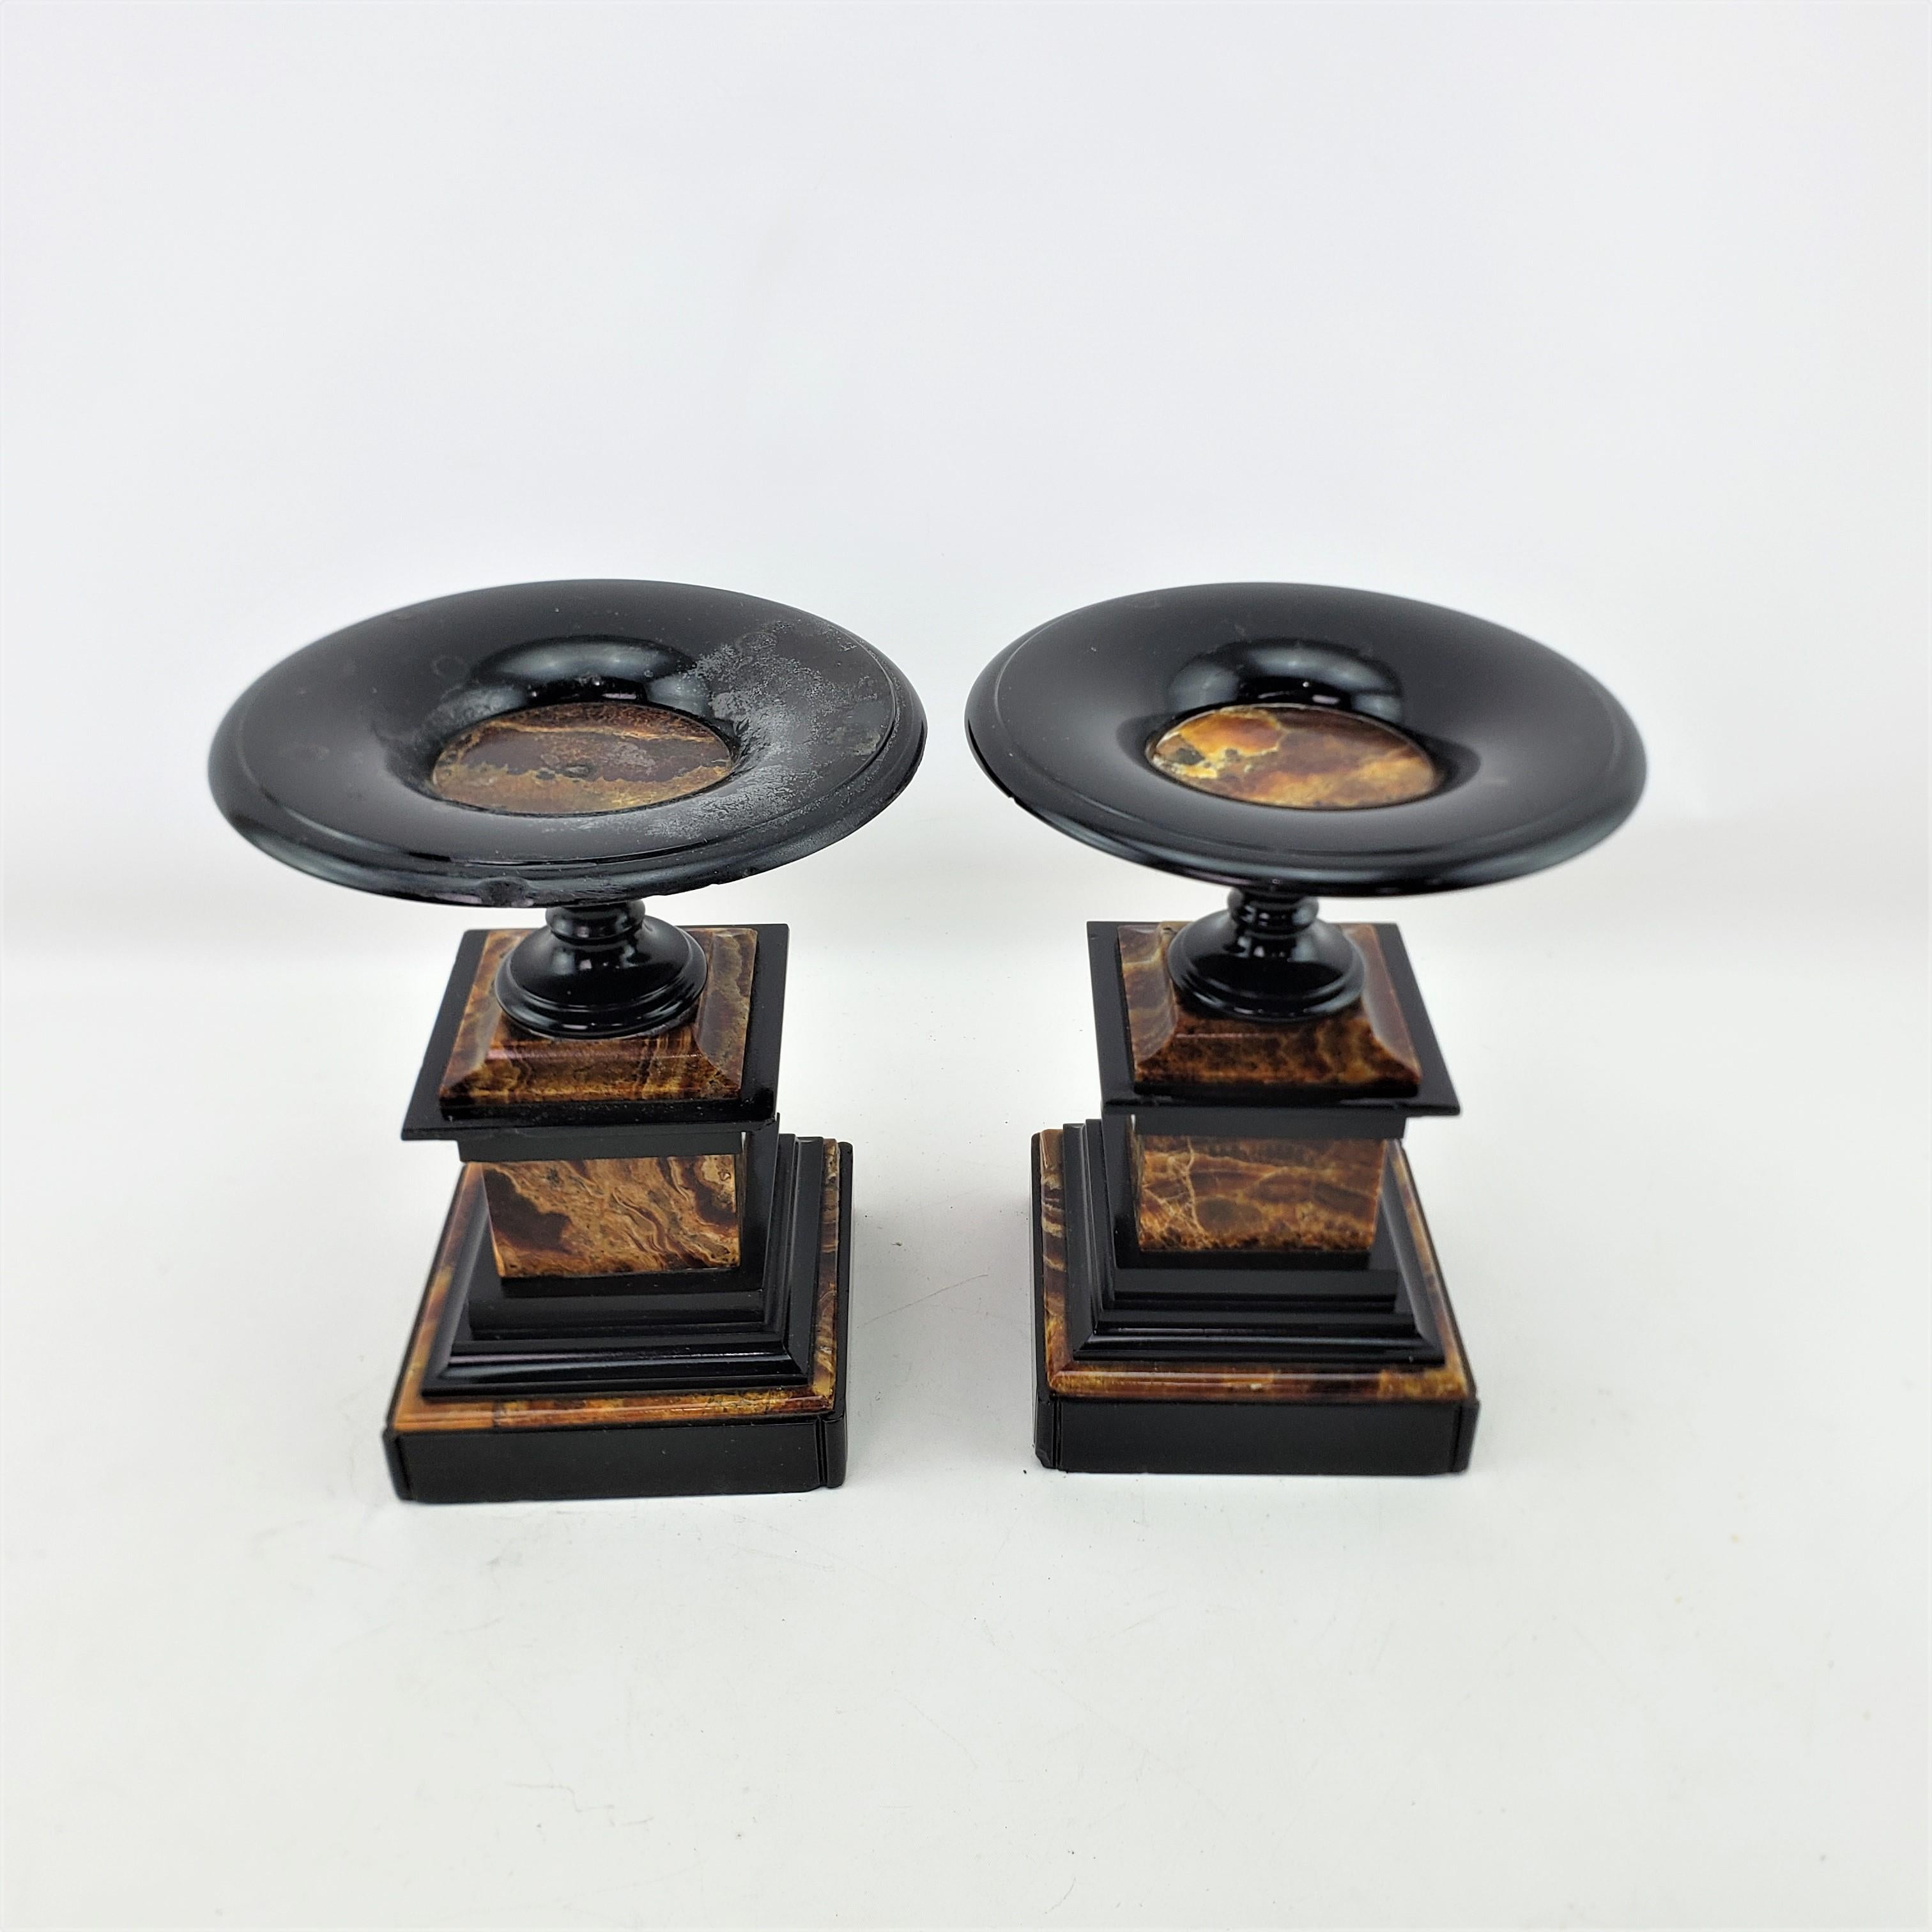 Pair of Antique French Polished Slate & Marble Garniture Set or Tazzas In Good Condition For Sale In Hamilton, Ontario